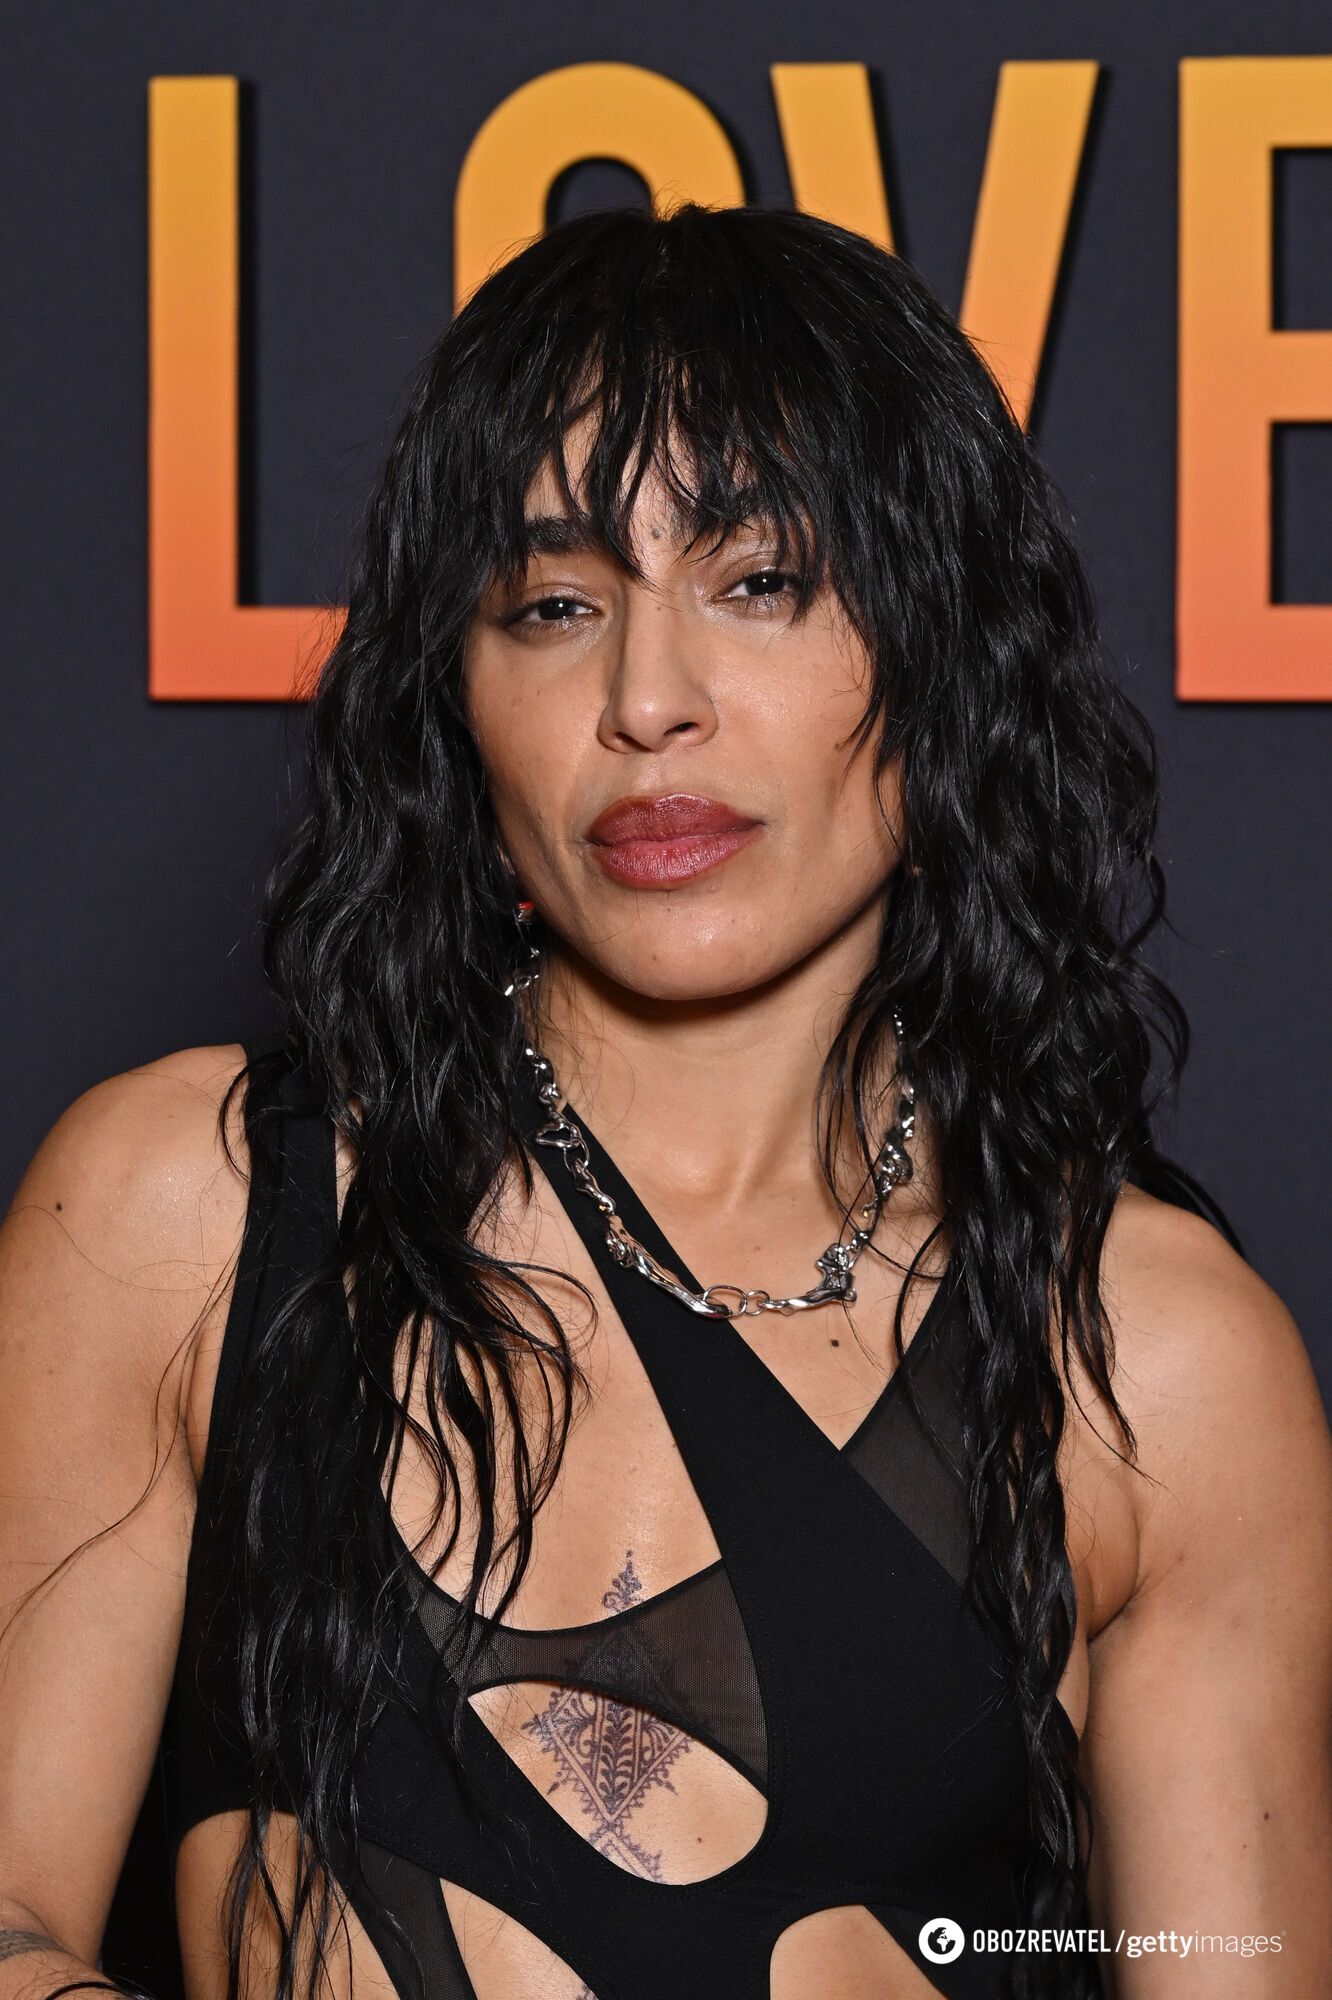 Loreen cancels concert at the pro-Putin Russian oligarch's festival in Azerbaijan: all details